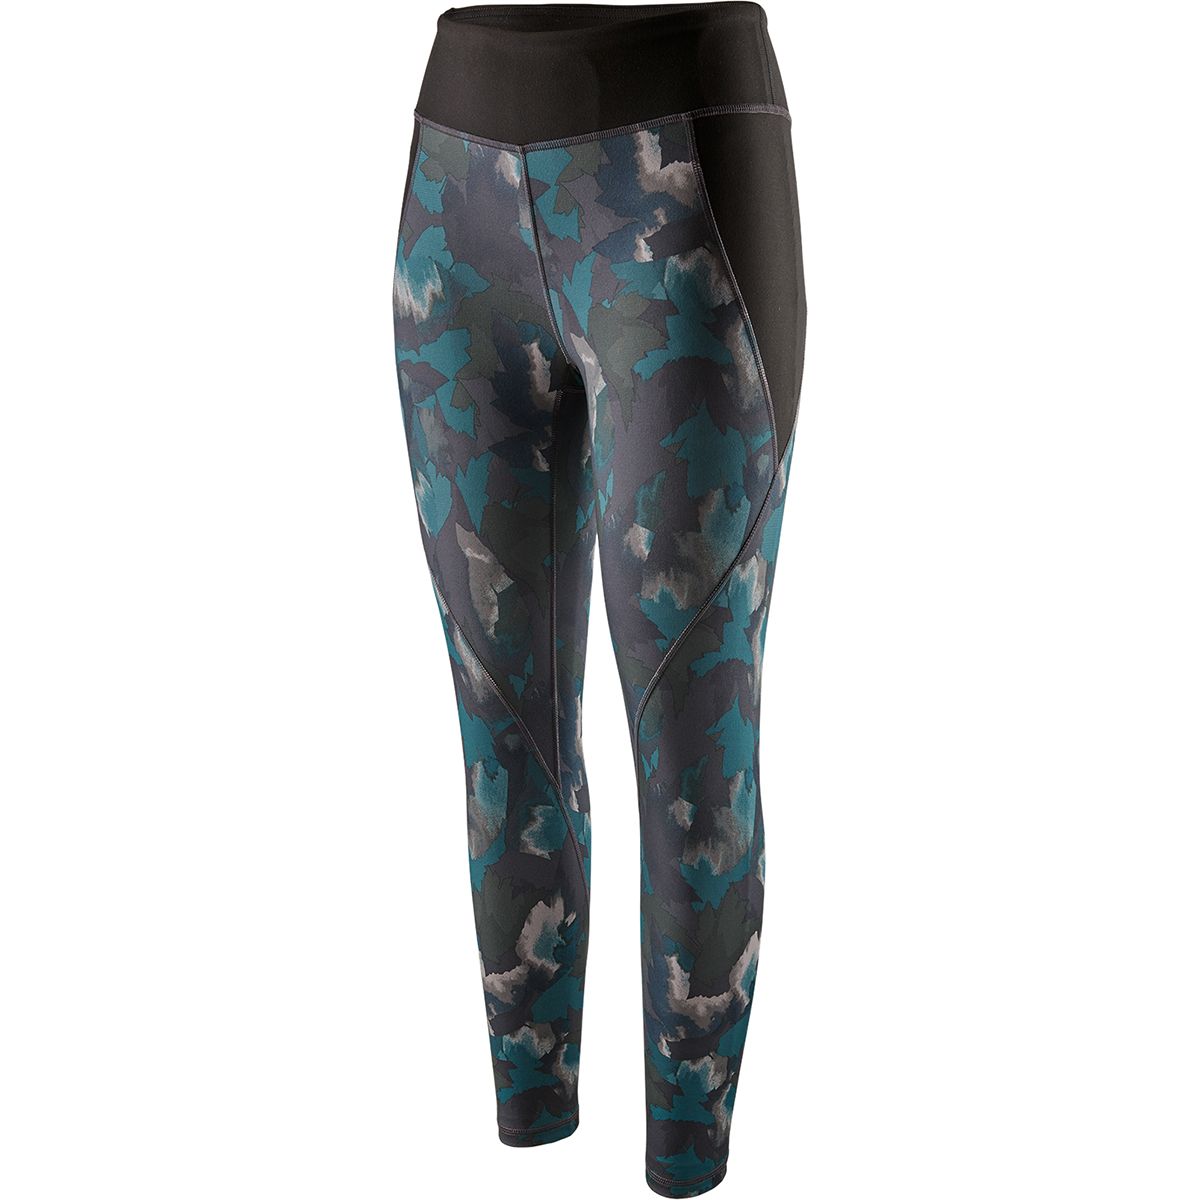 Landmark  Patagonia Centered Tights in Cosmic Carving:Northern Green